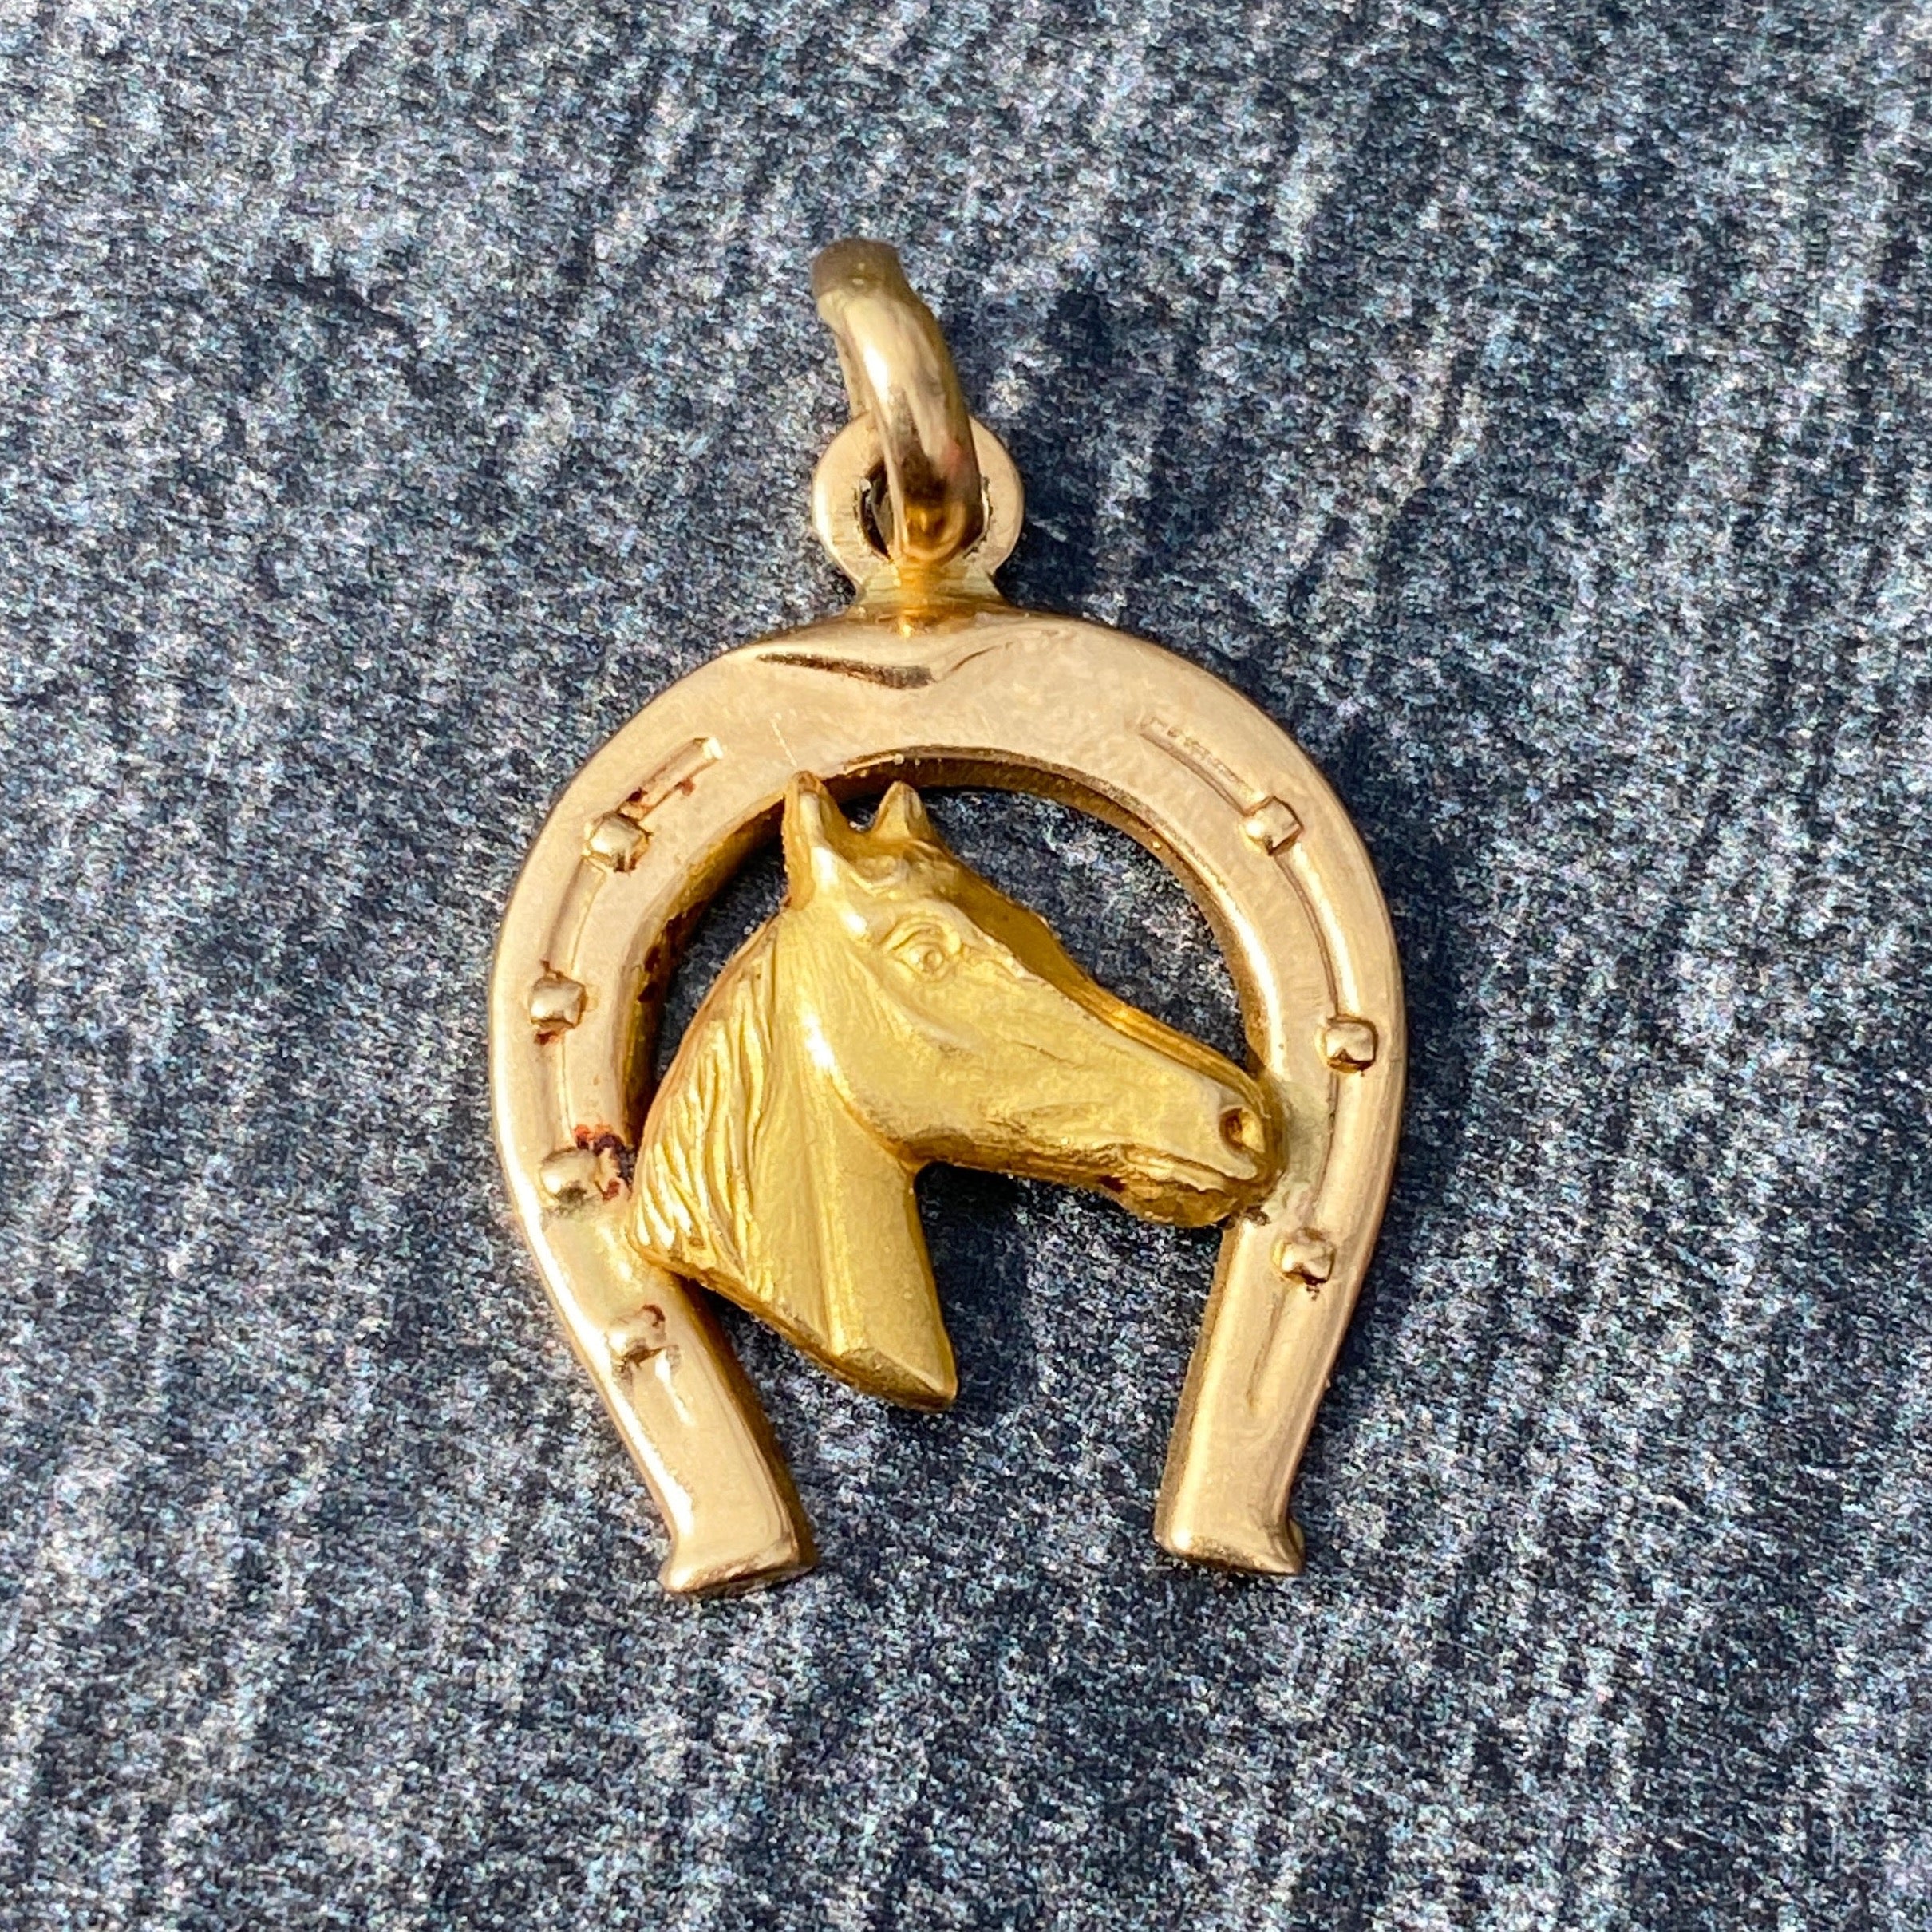 Royal Horse Shaped Charm Pendant with Chain